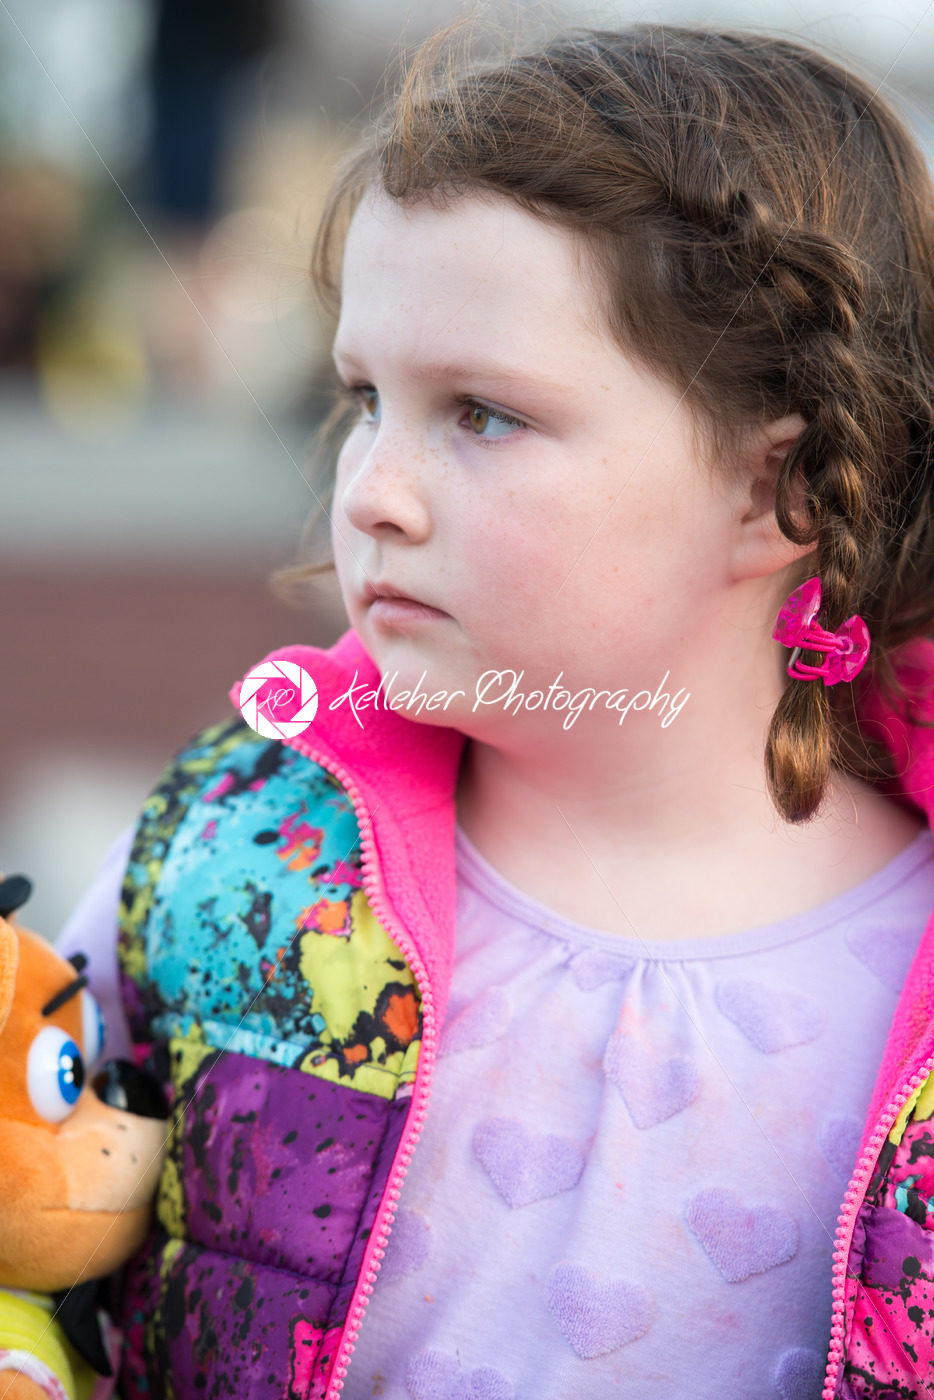 Young girl looking off into the distance - Kelleher Photography Store